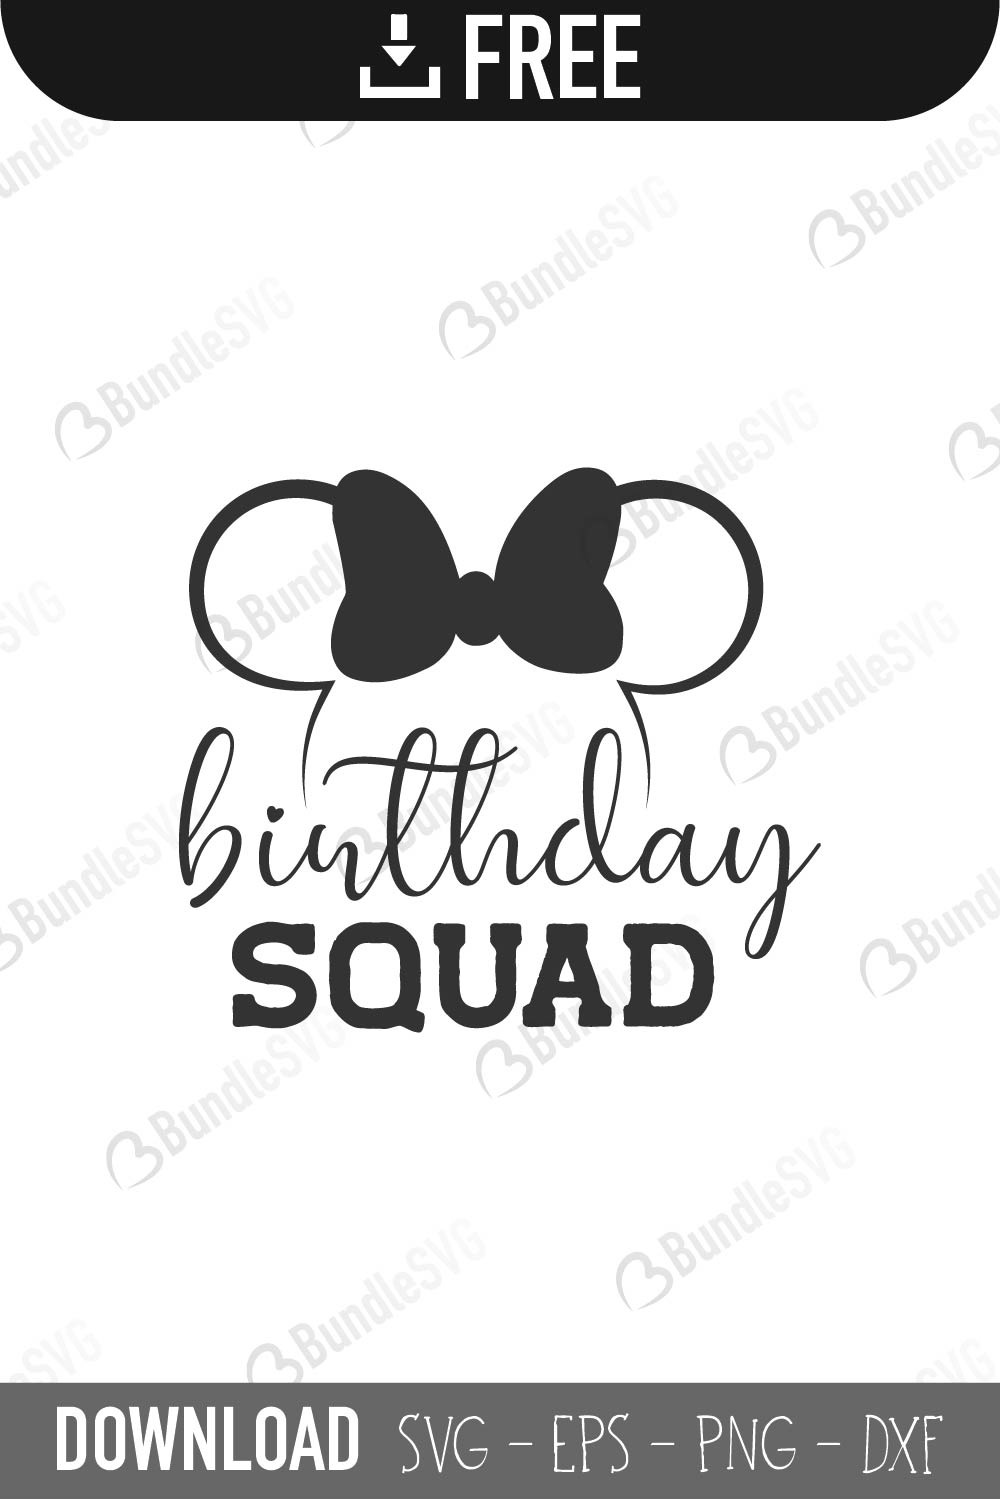 Download View Birthday Squad Svg Free Images Free SVG files ...